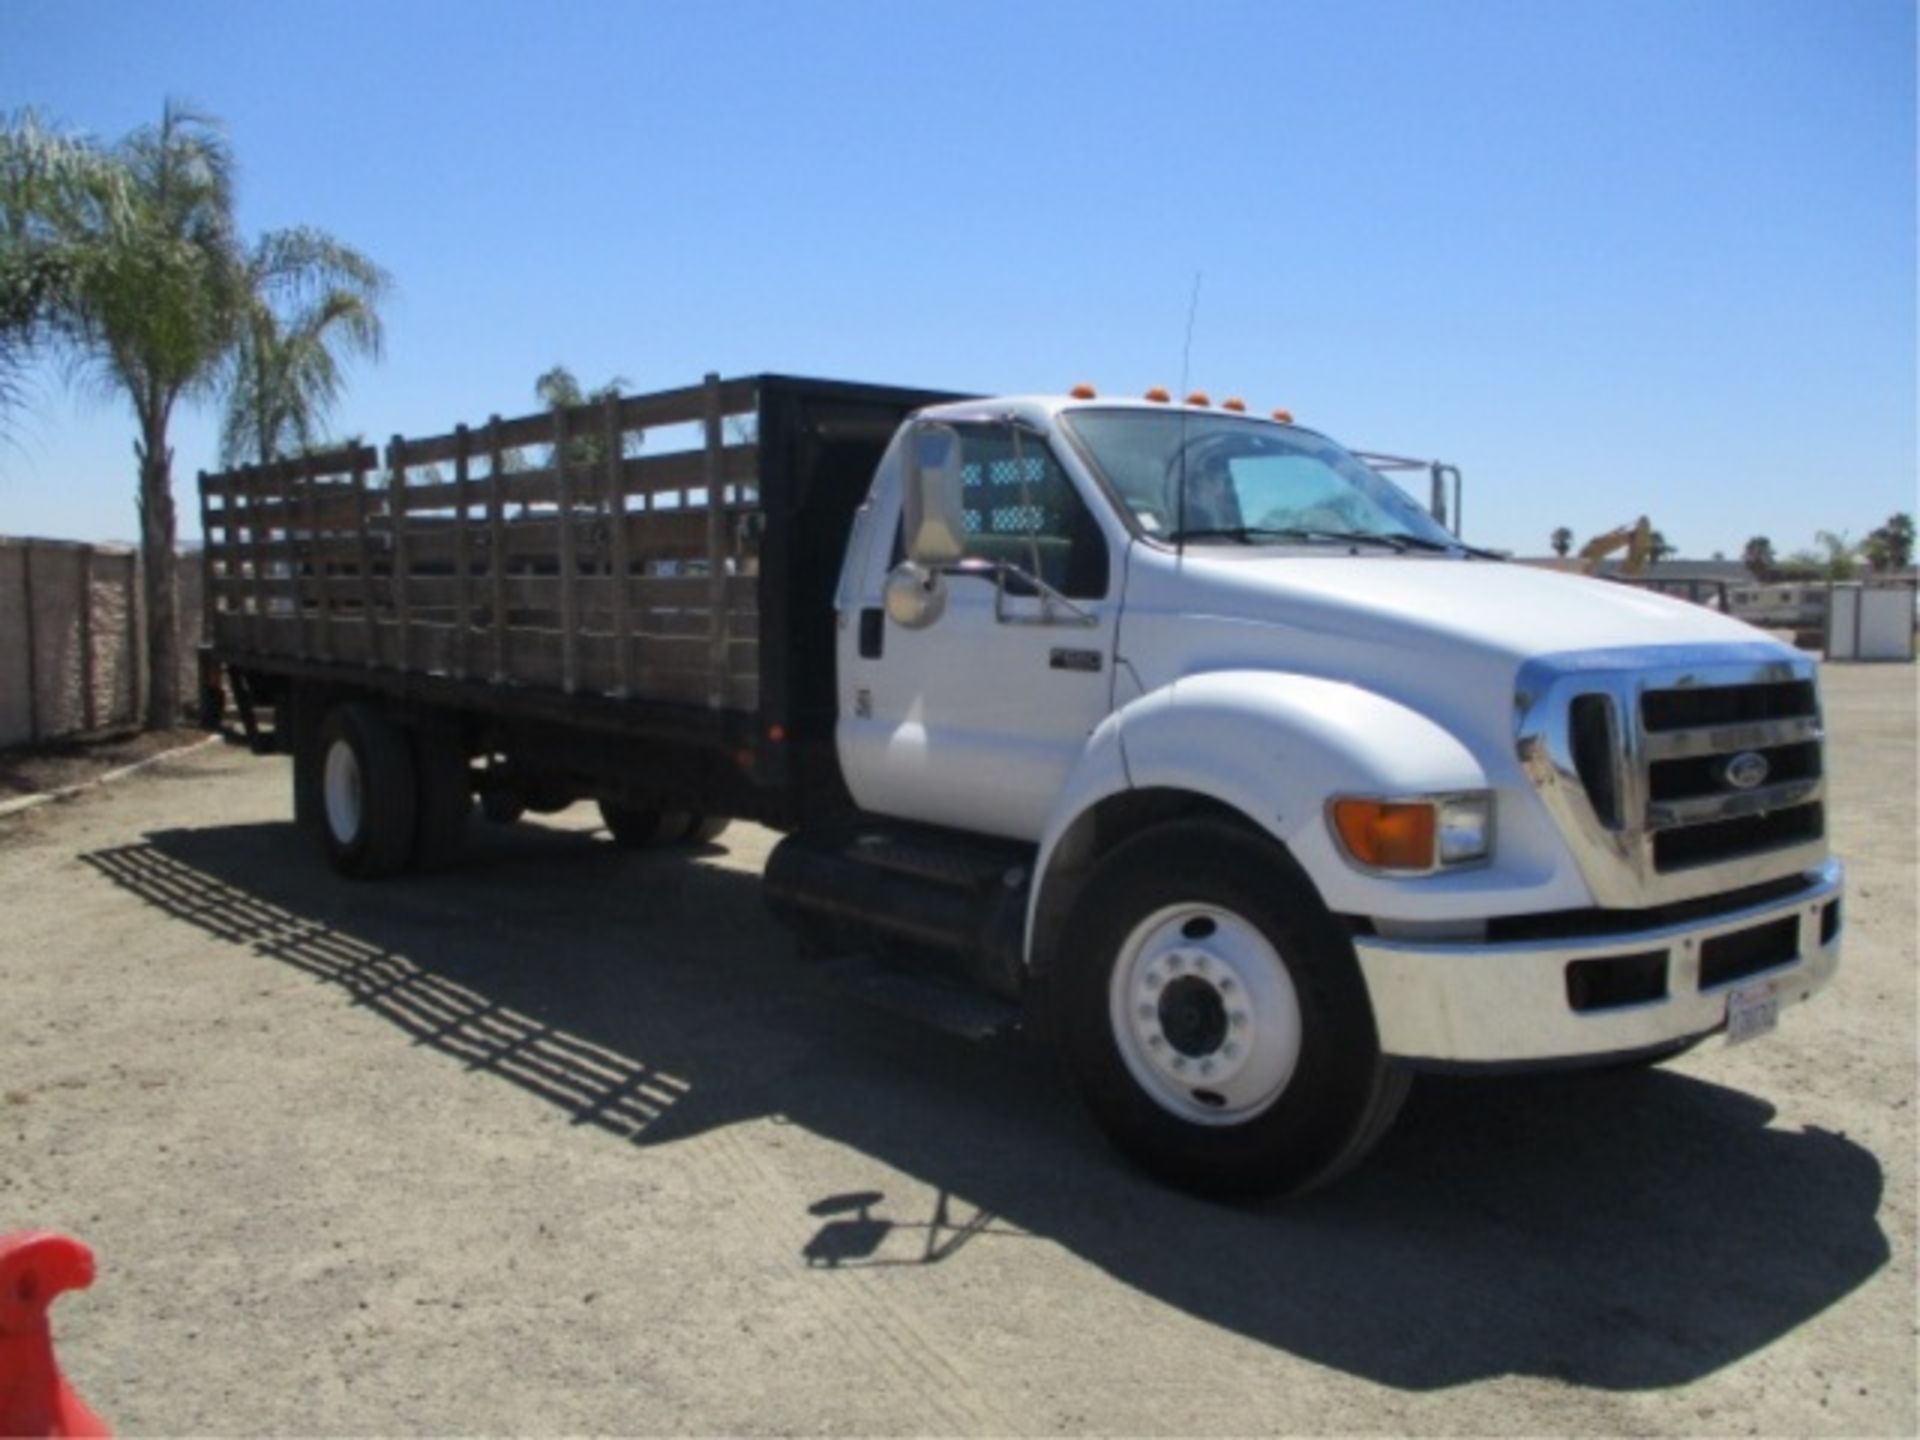 2005 Ford F650 S/A Flatbed Stakebed Truck, Cat C7 Acert 7.2L 6-Cyl Diesel, Automatic, Lift Gate, 24' - Image 8 of 61